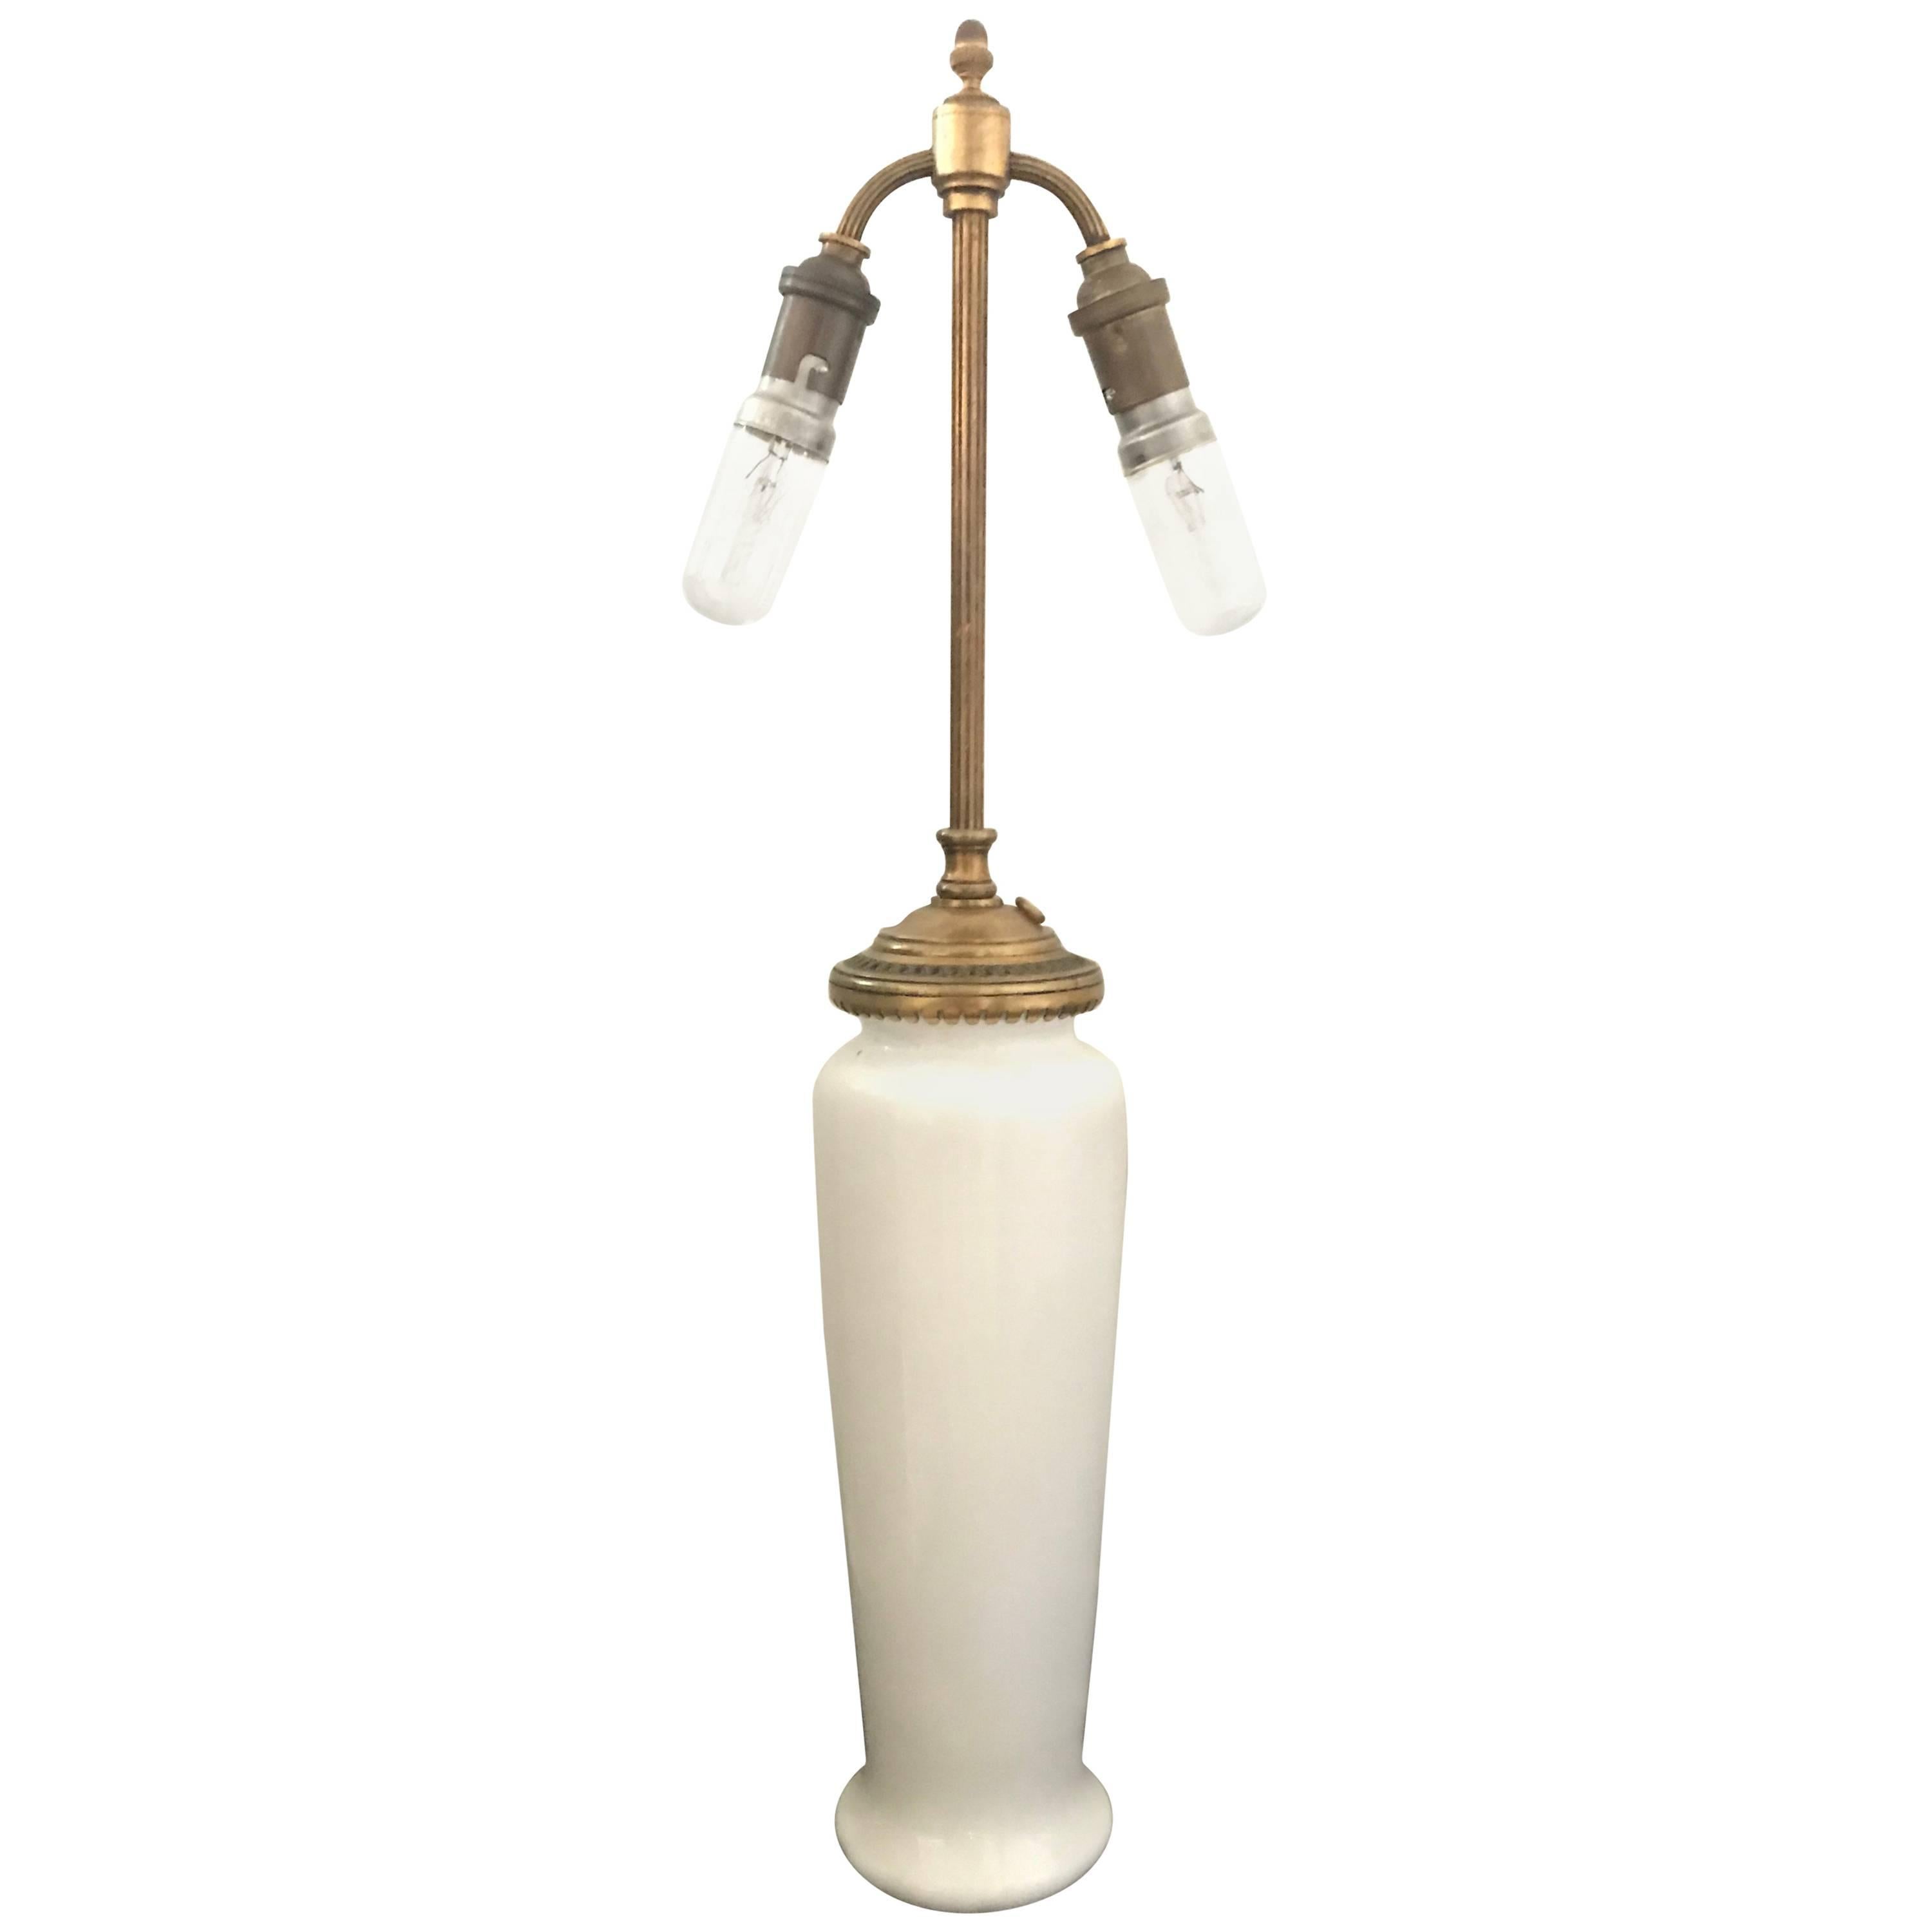 Signed Three-Light Table Lamp by Baccarat, France 1920 in Opaline Glass & Bronze